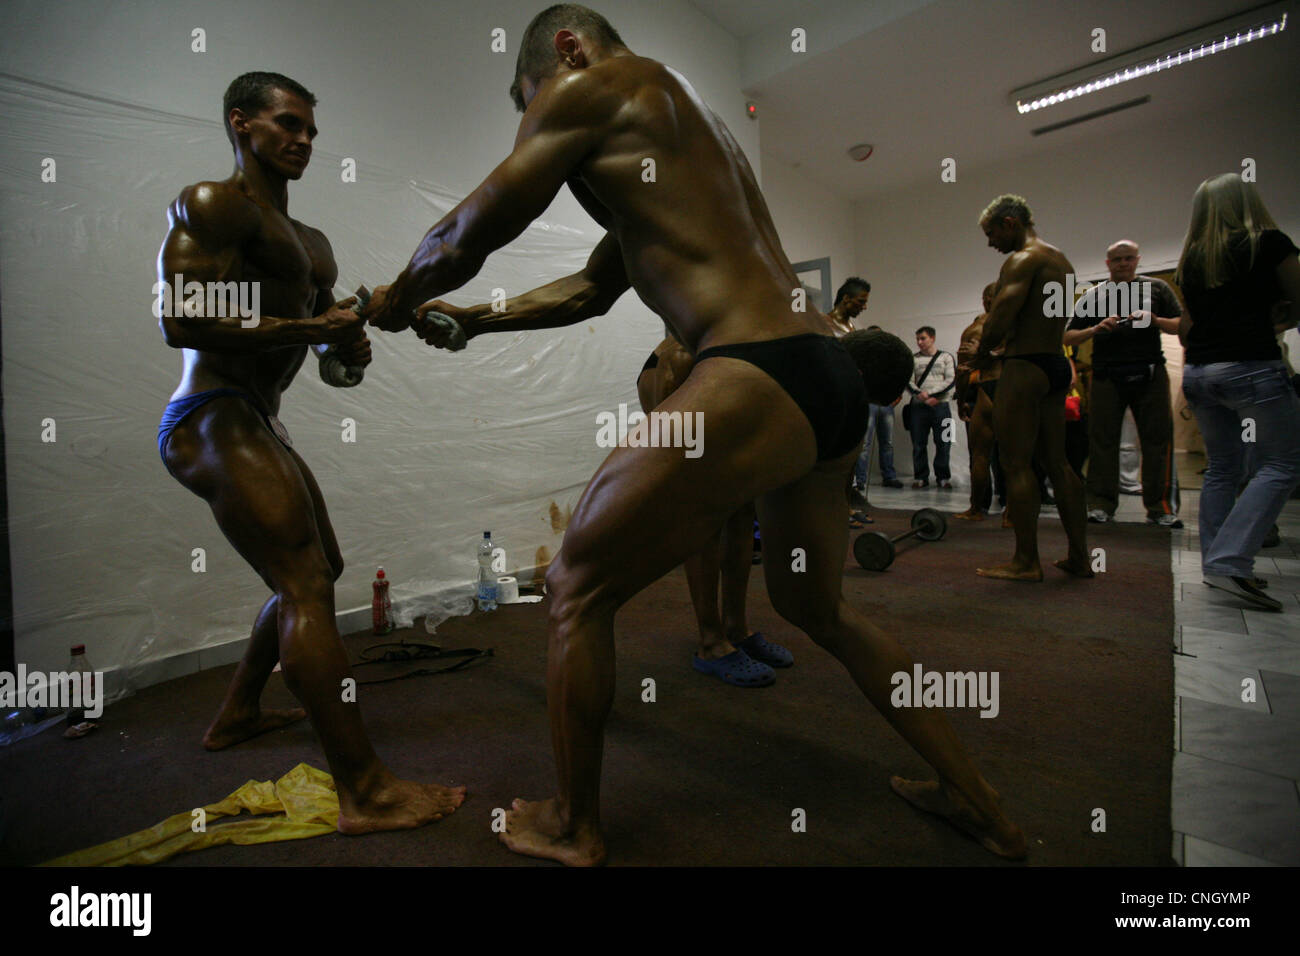 Czech national championship in natural bodybuilding. Bodybuilders warming up for the competition. Stock Photo